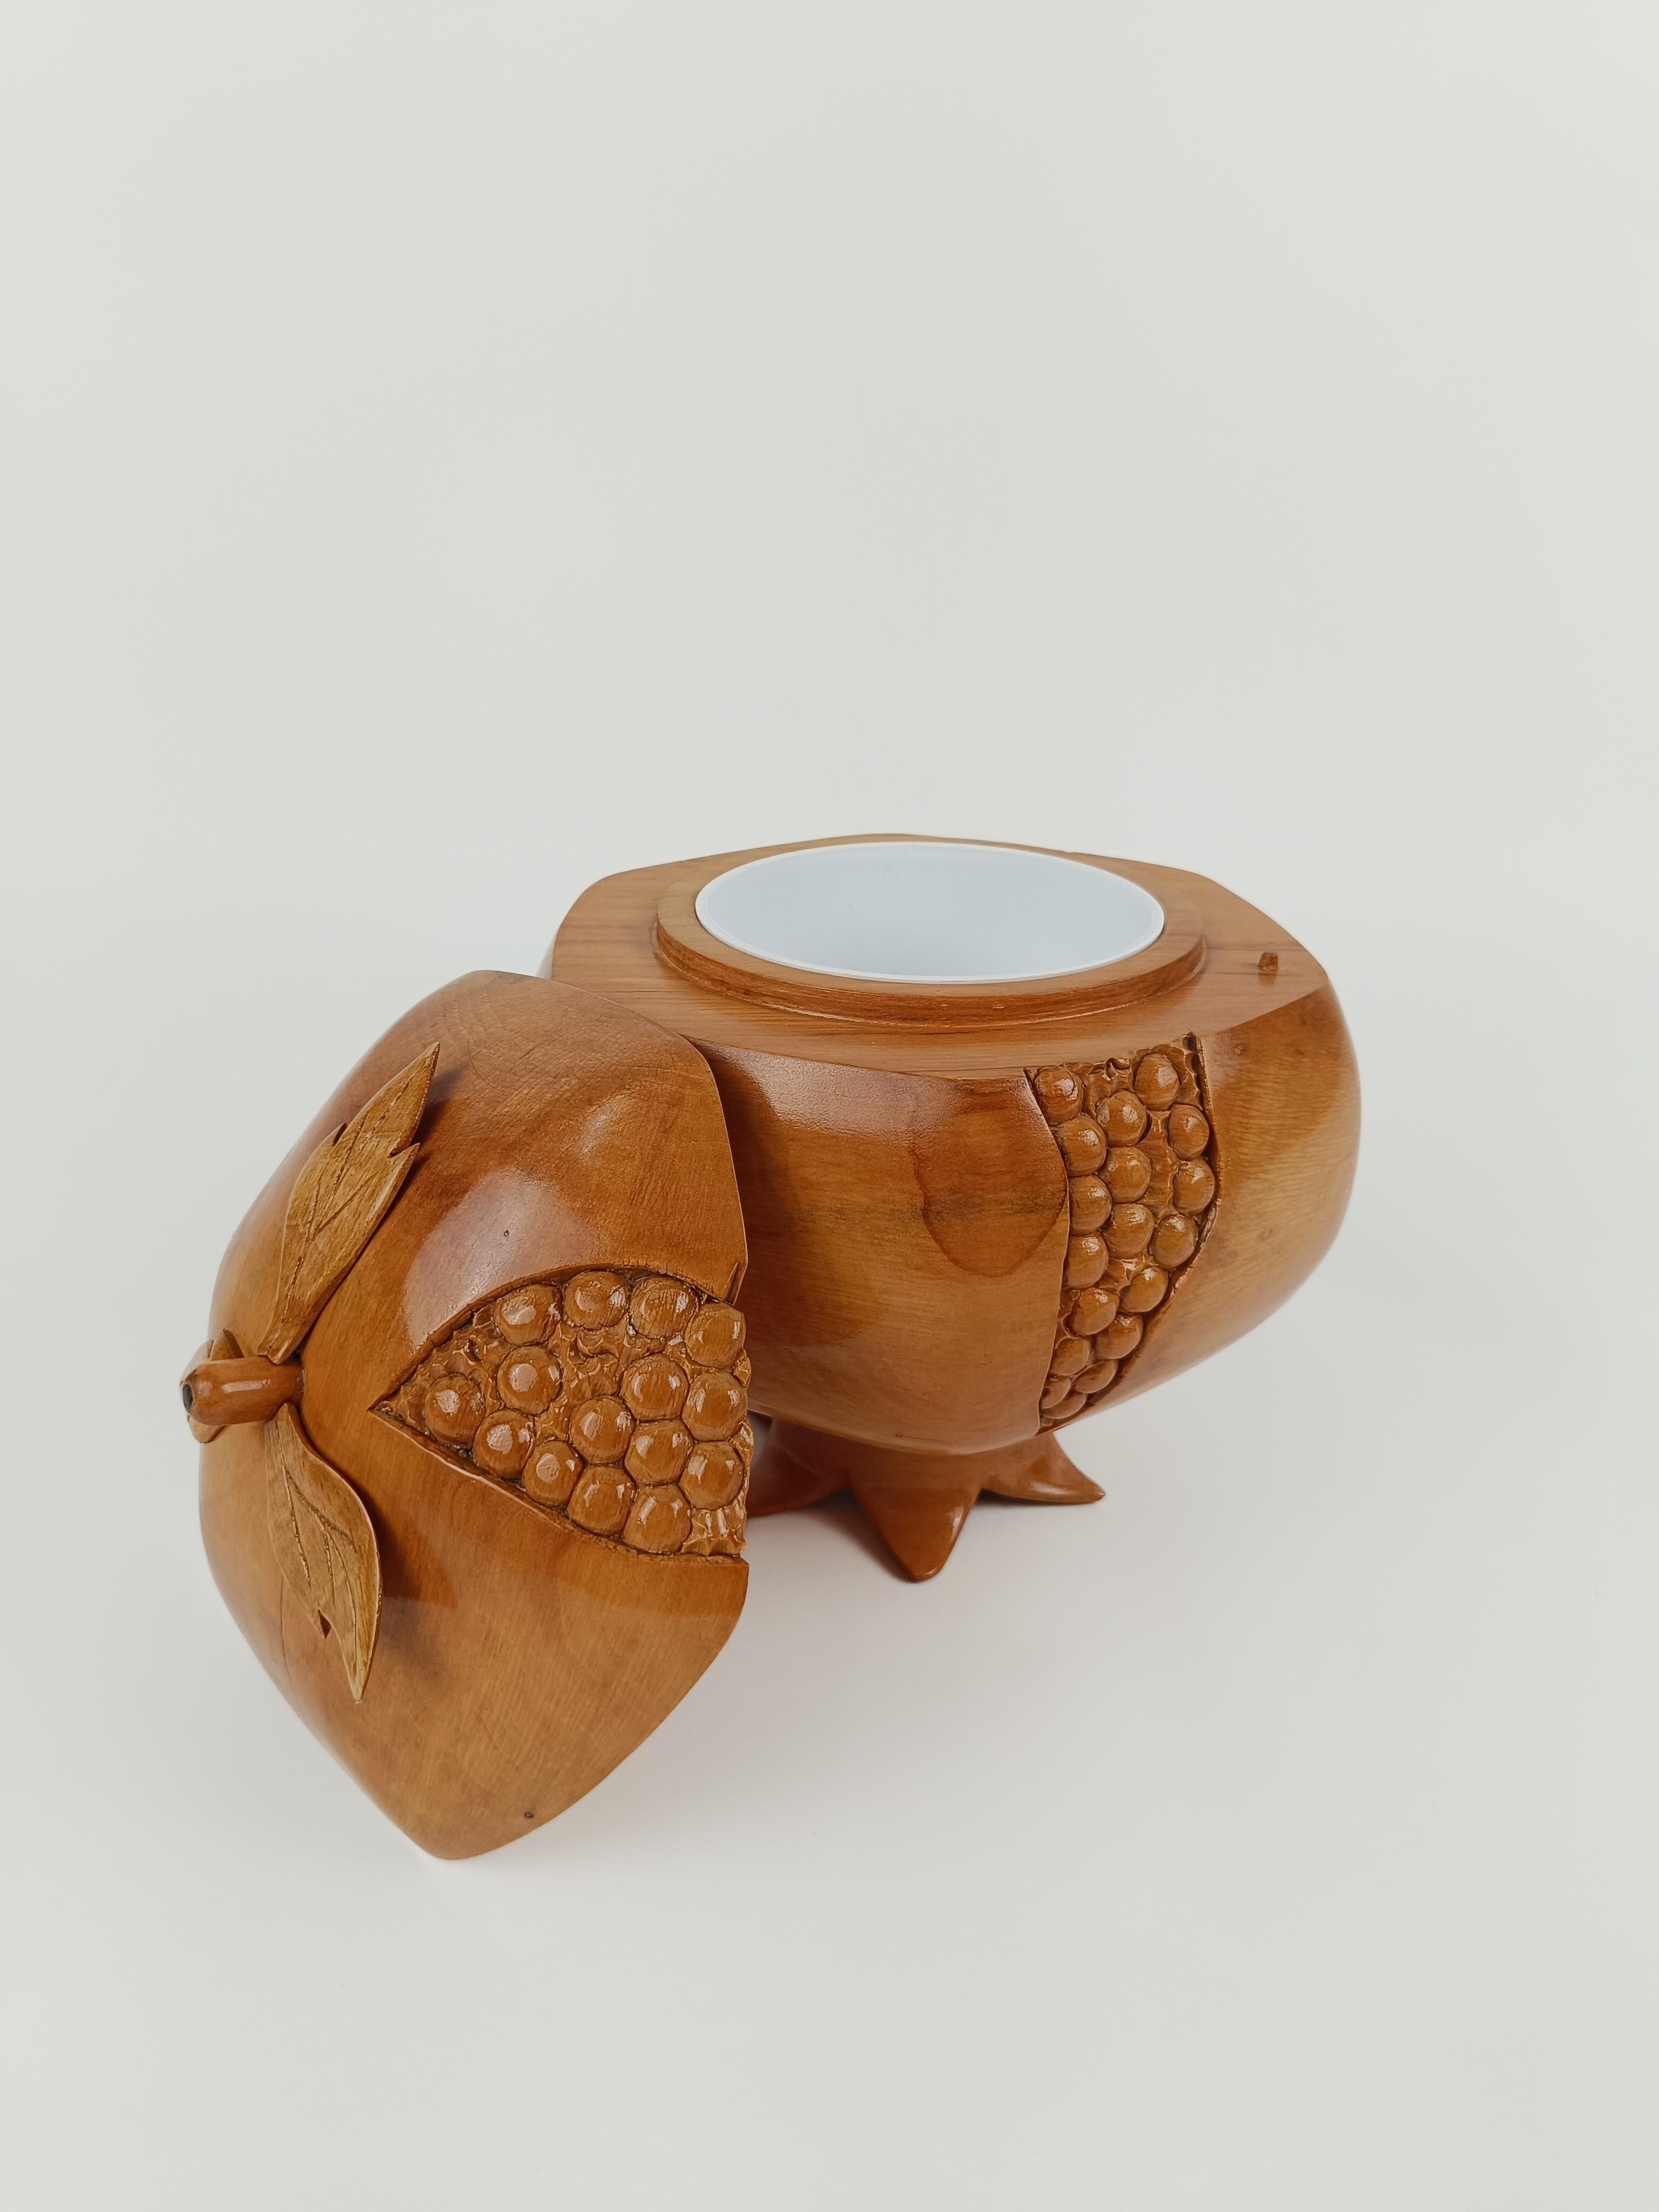 Sculptural Vintage Ice Bucket in maple wood carved in the shape of a pomegranate 2